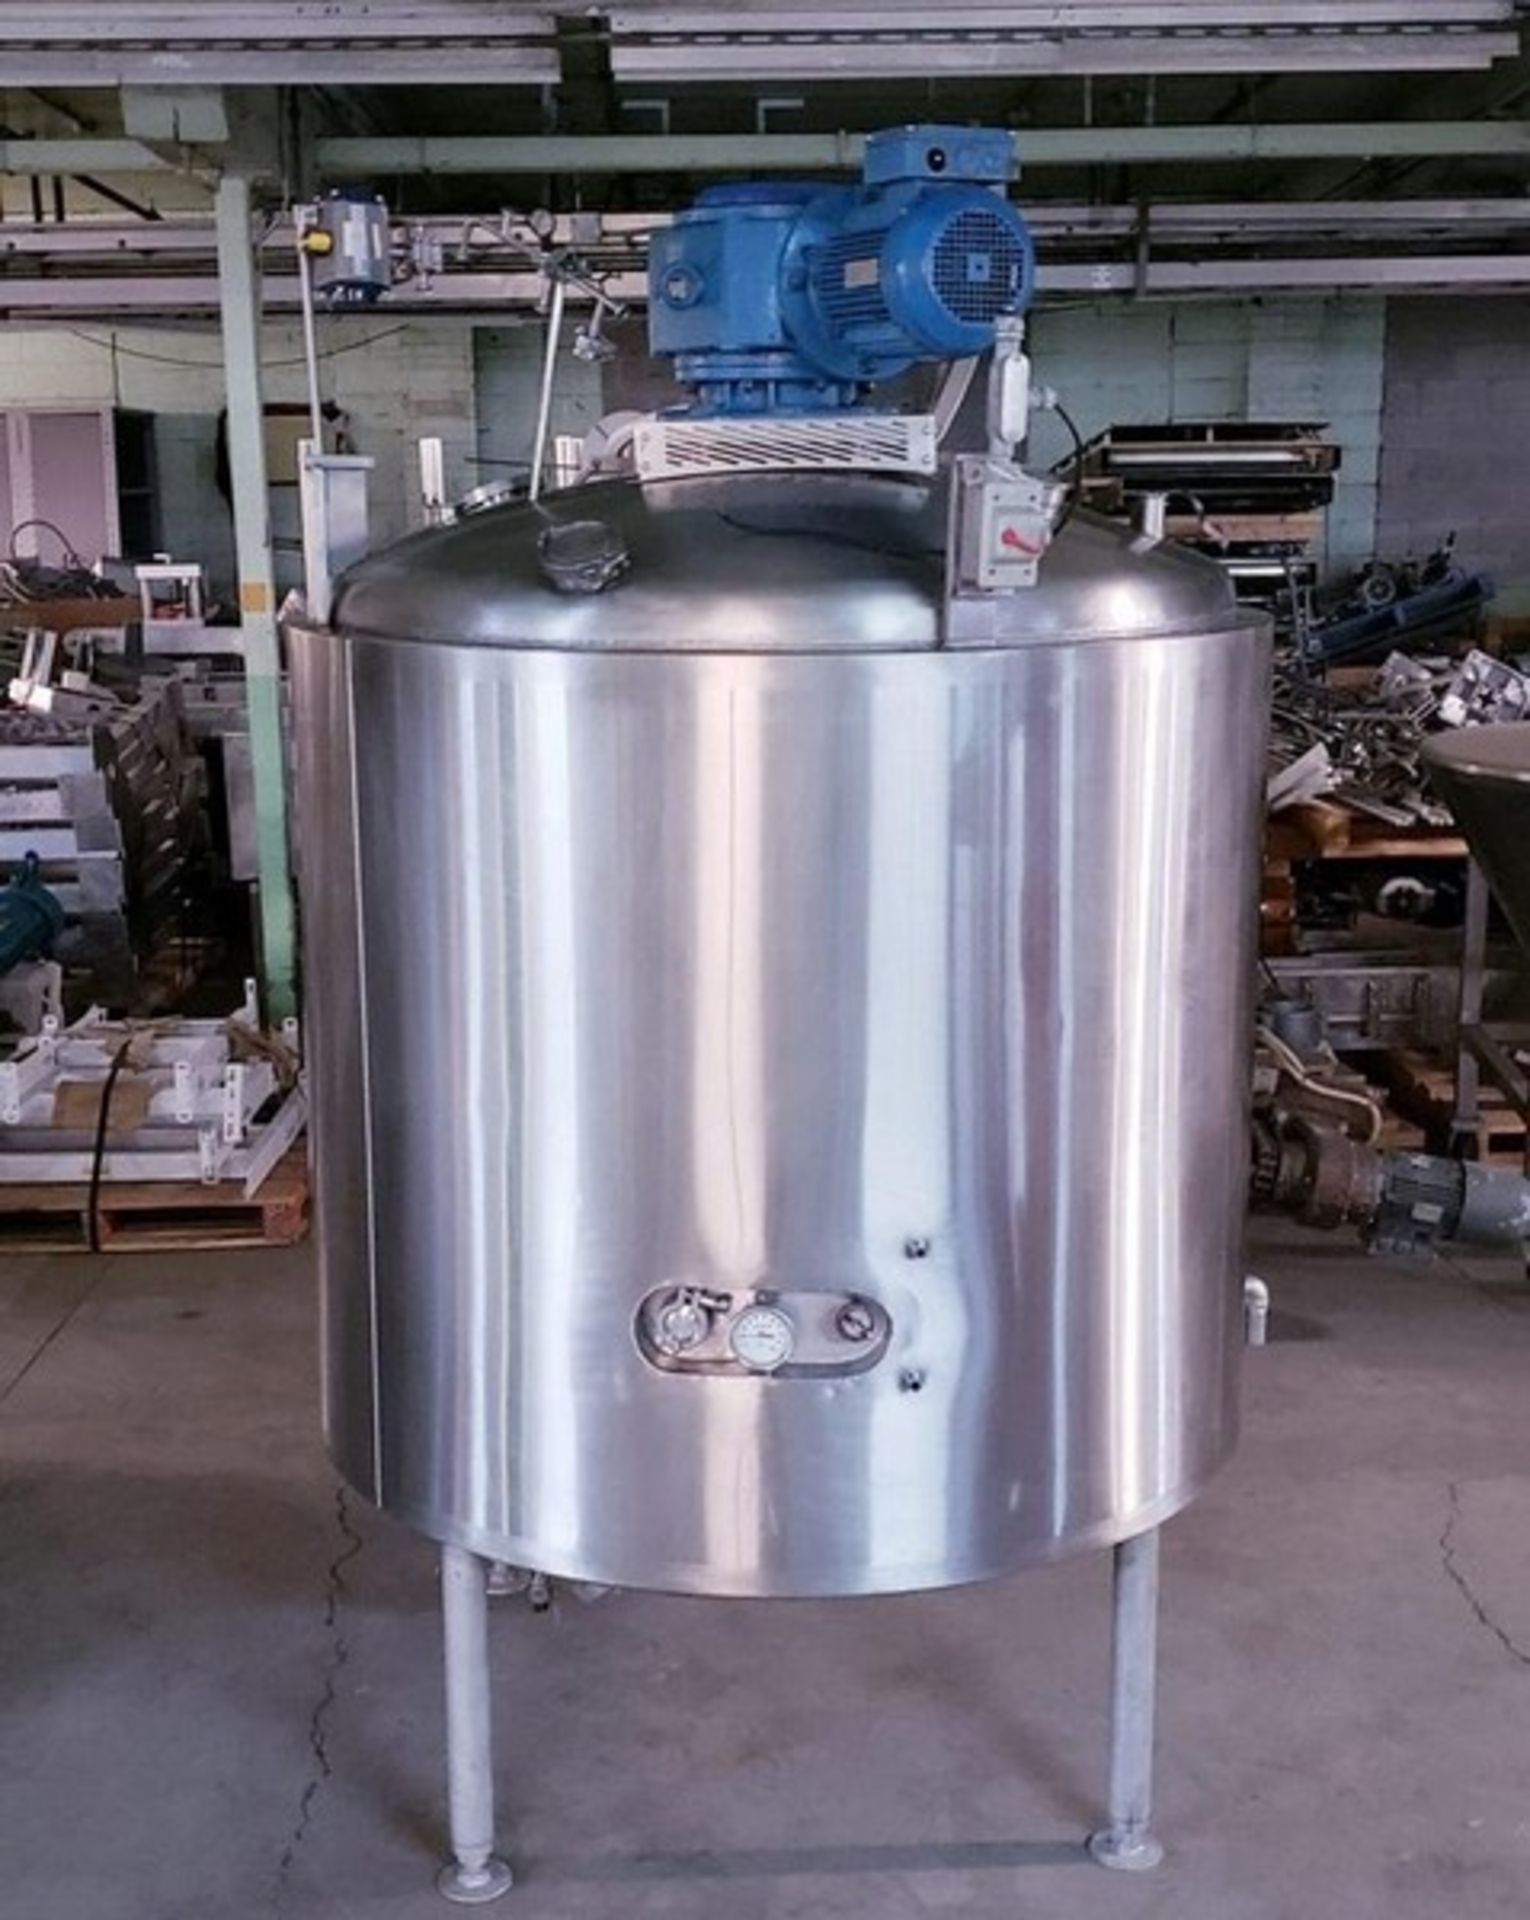 Cooling mixing tank mixer 230-460 volts 3 phase 316 Stainless Steel 500 gallons (Loading Fee $ - Image 3 of 5